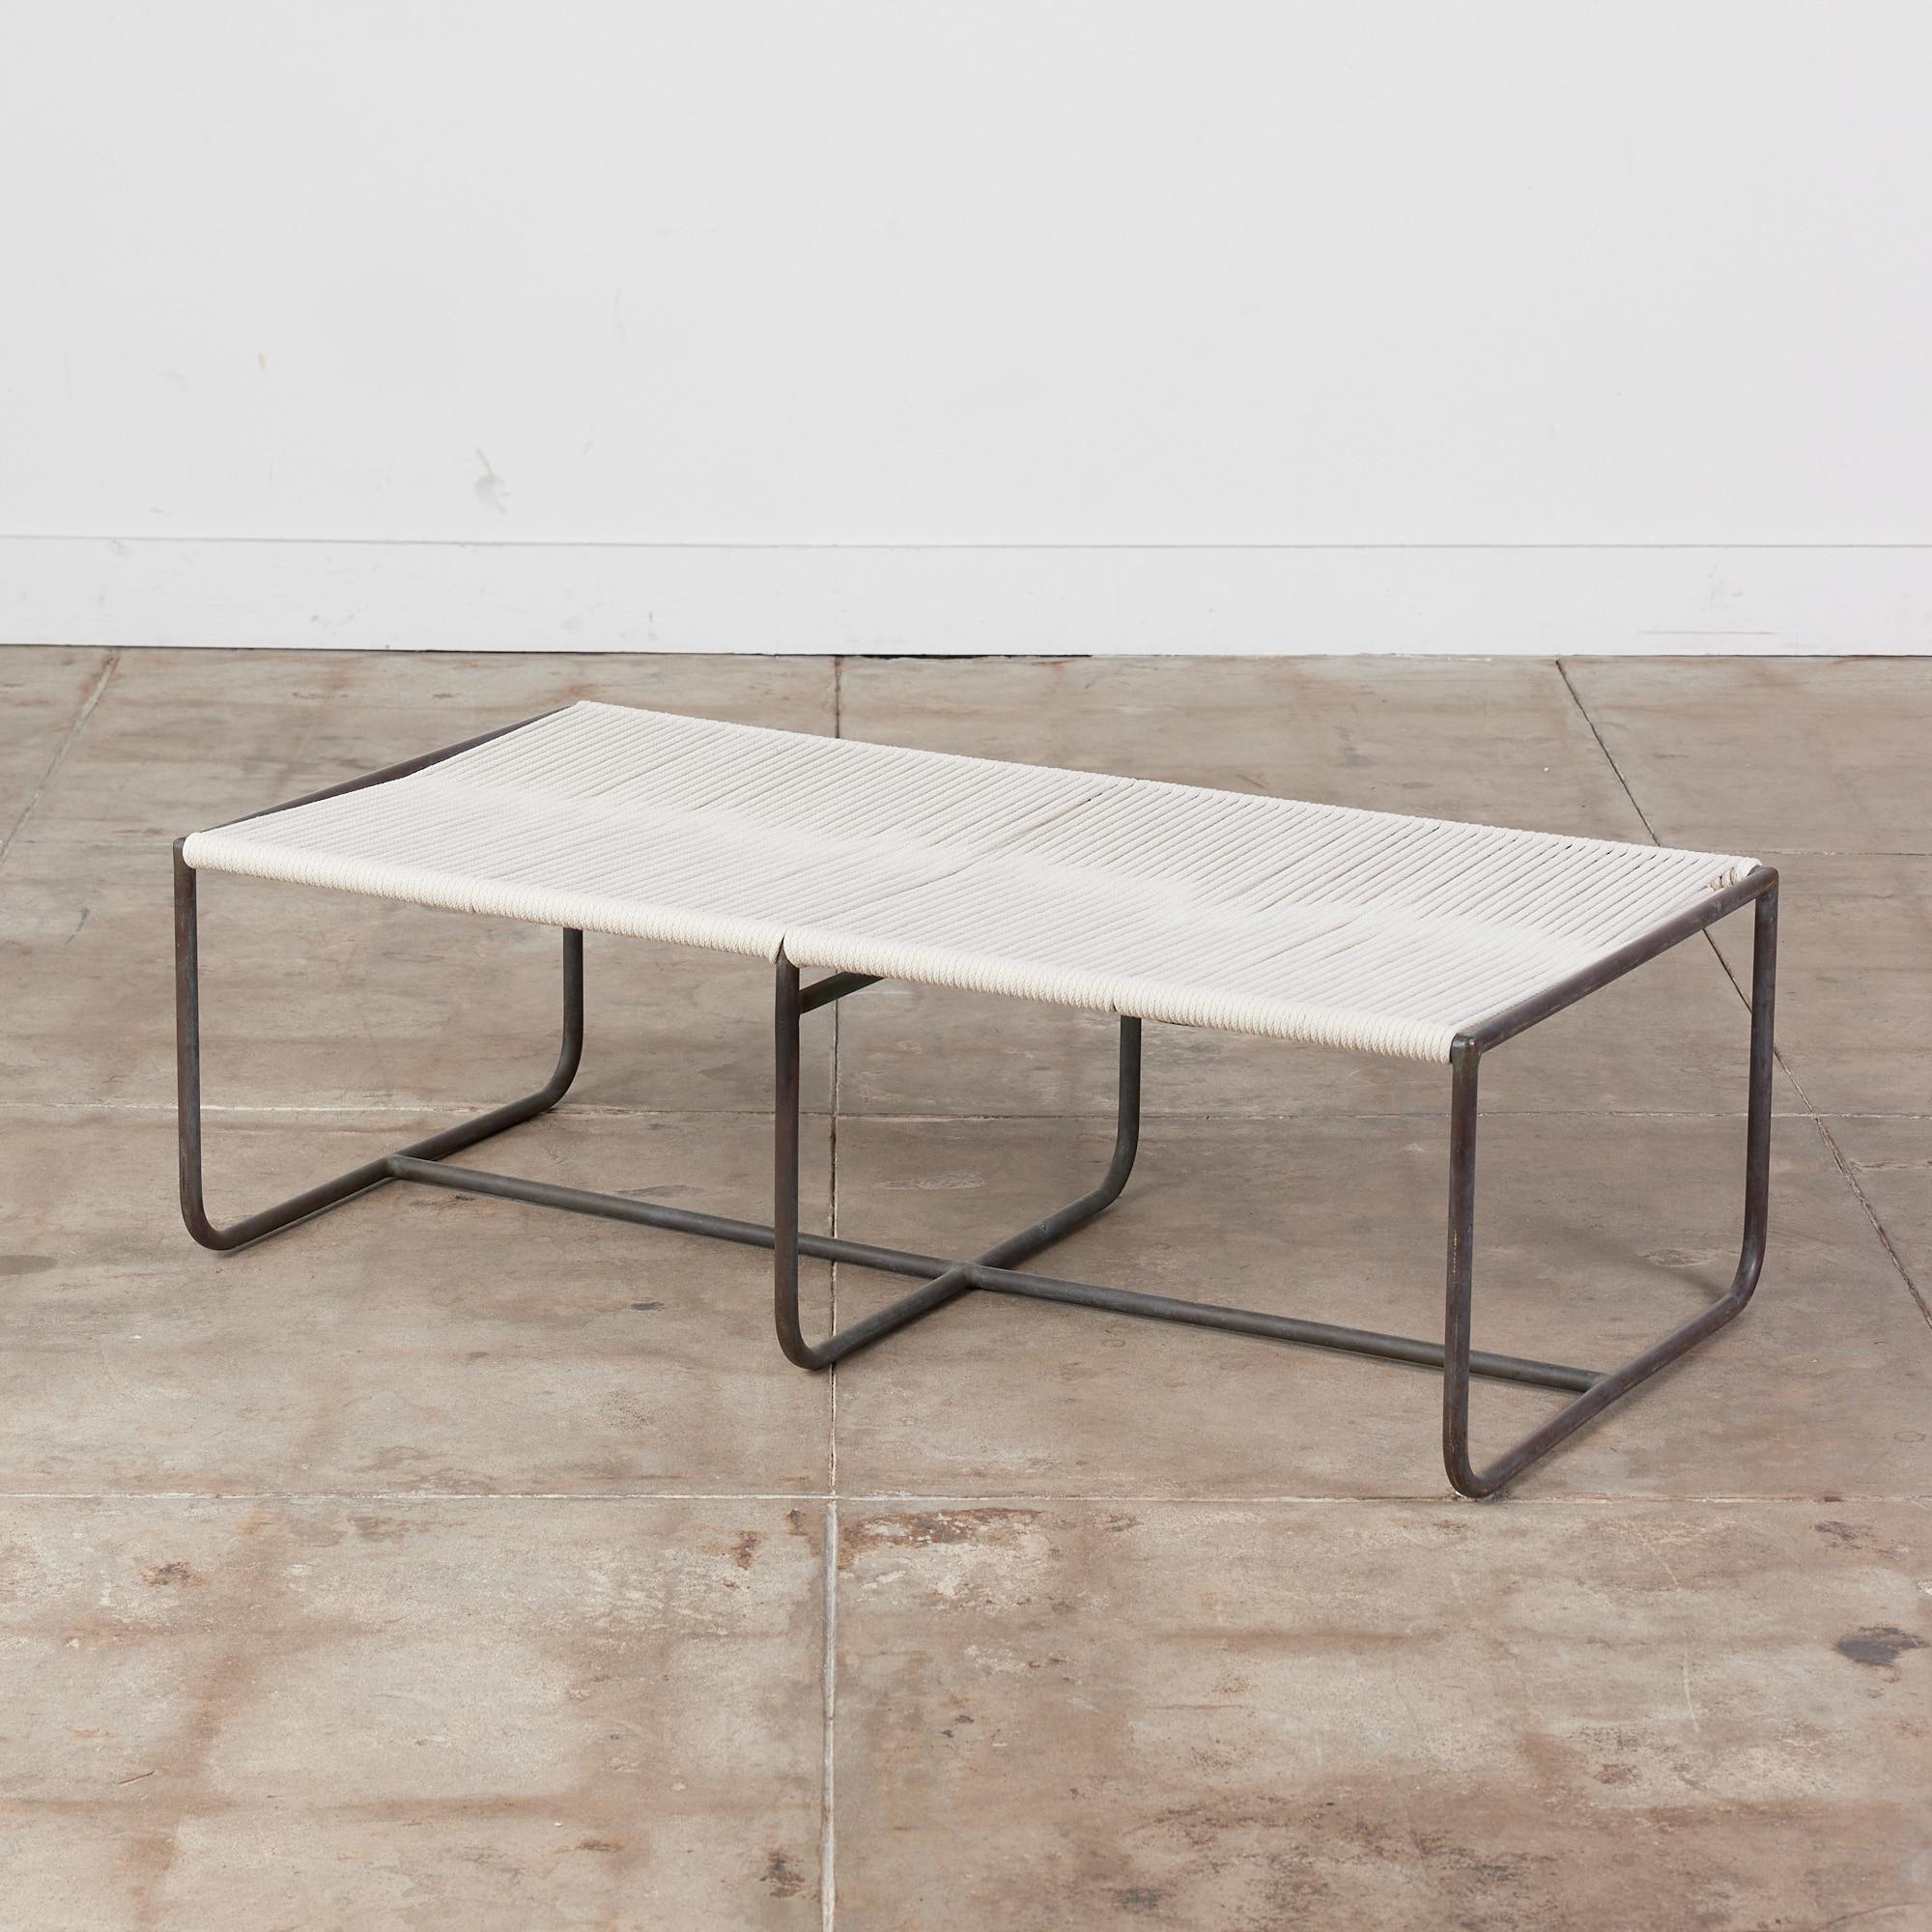 Bronze two seater bench by Walter Lamb for Brown Jordan. The bench has simple construction in tubular bronze with a patinated finish. The bench has three rounded square supports and a stretcher that runs the length of the piece. 

All Walter Lamb